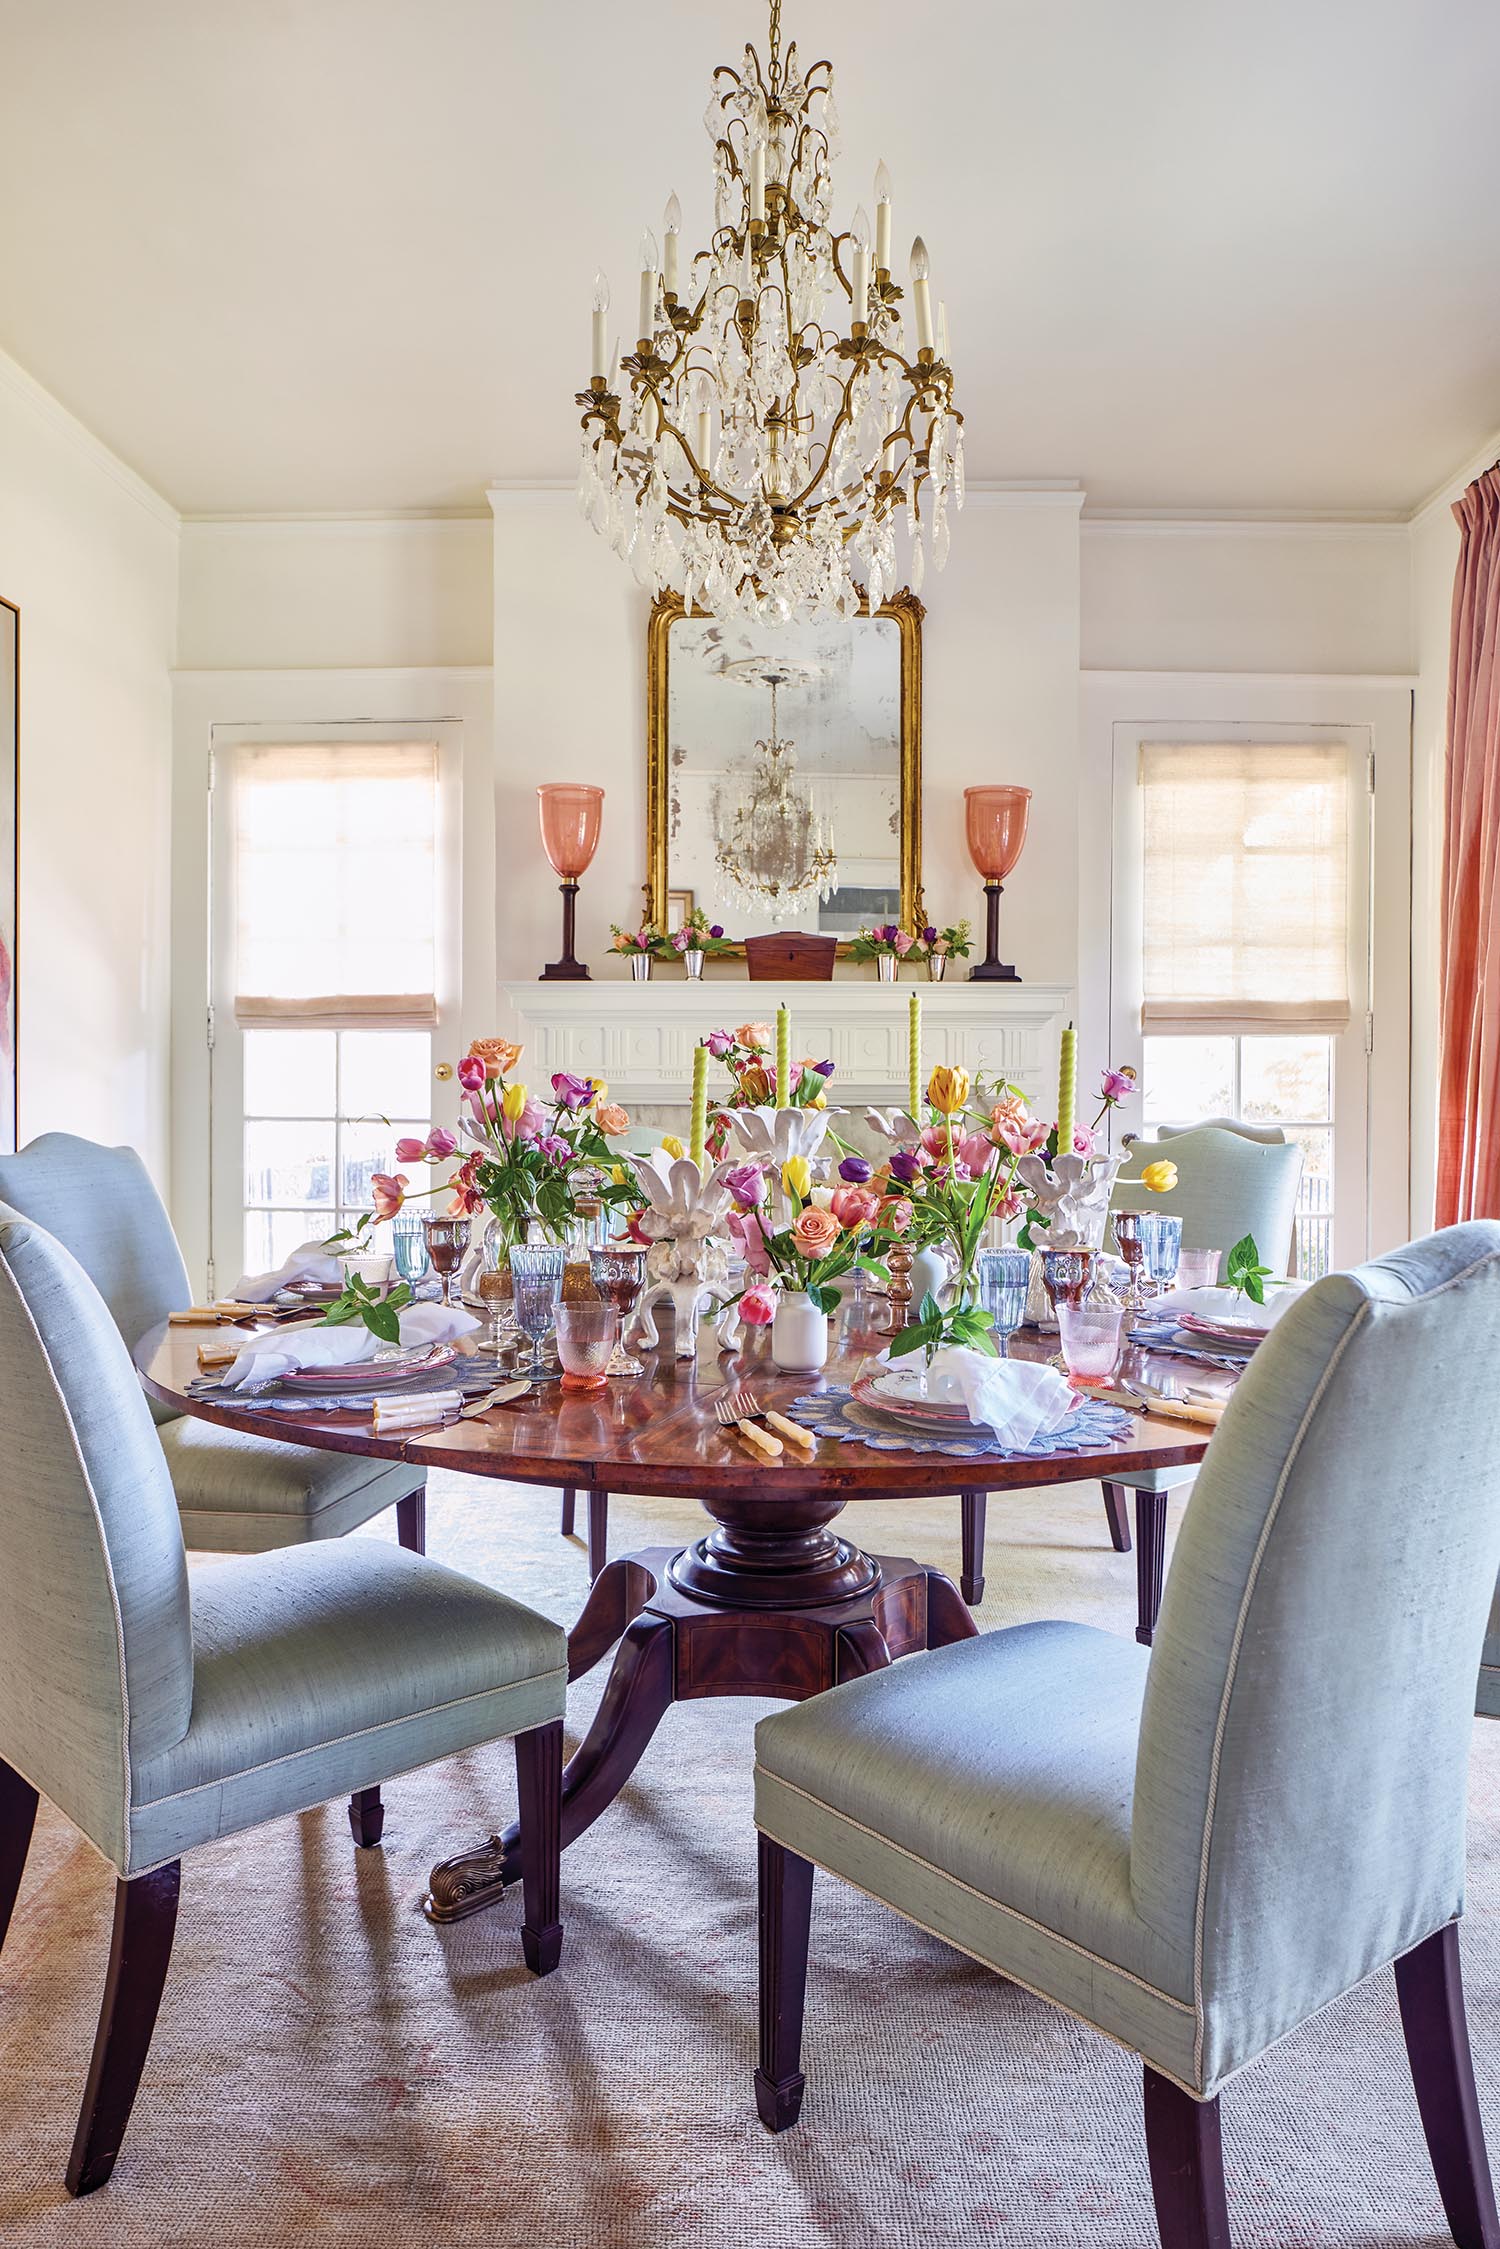 A dining table is set with flowers and surround by light blue chairs.